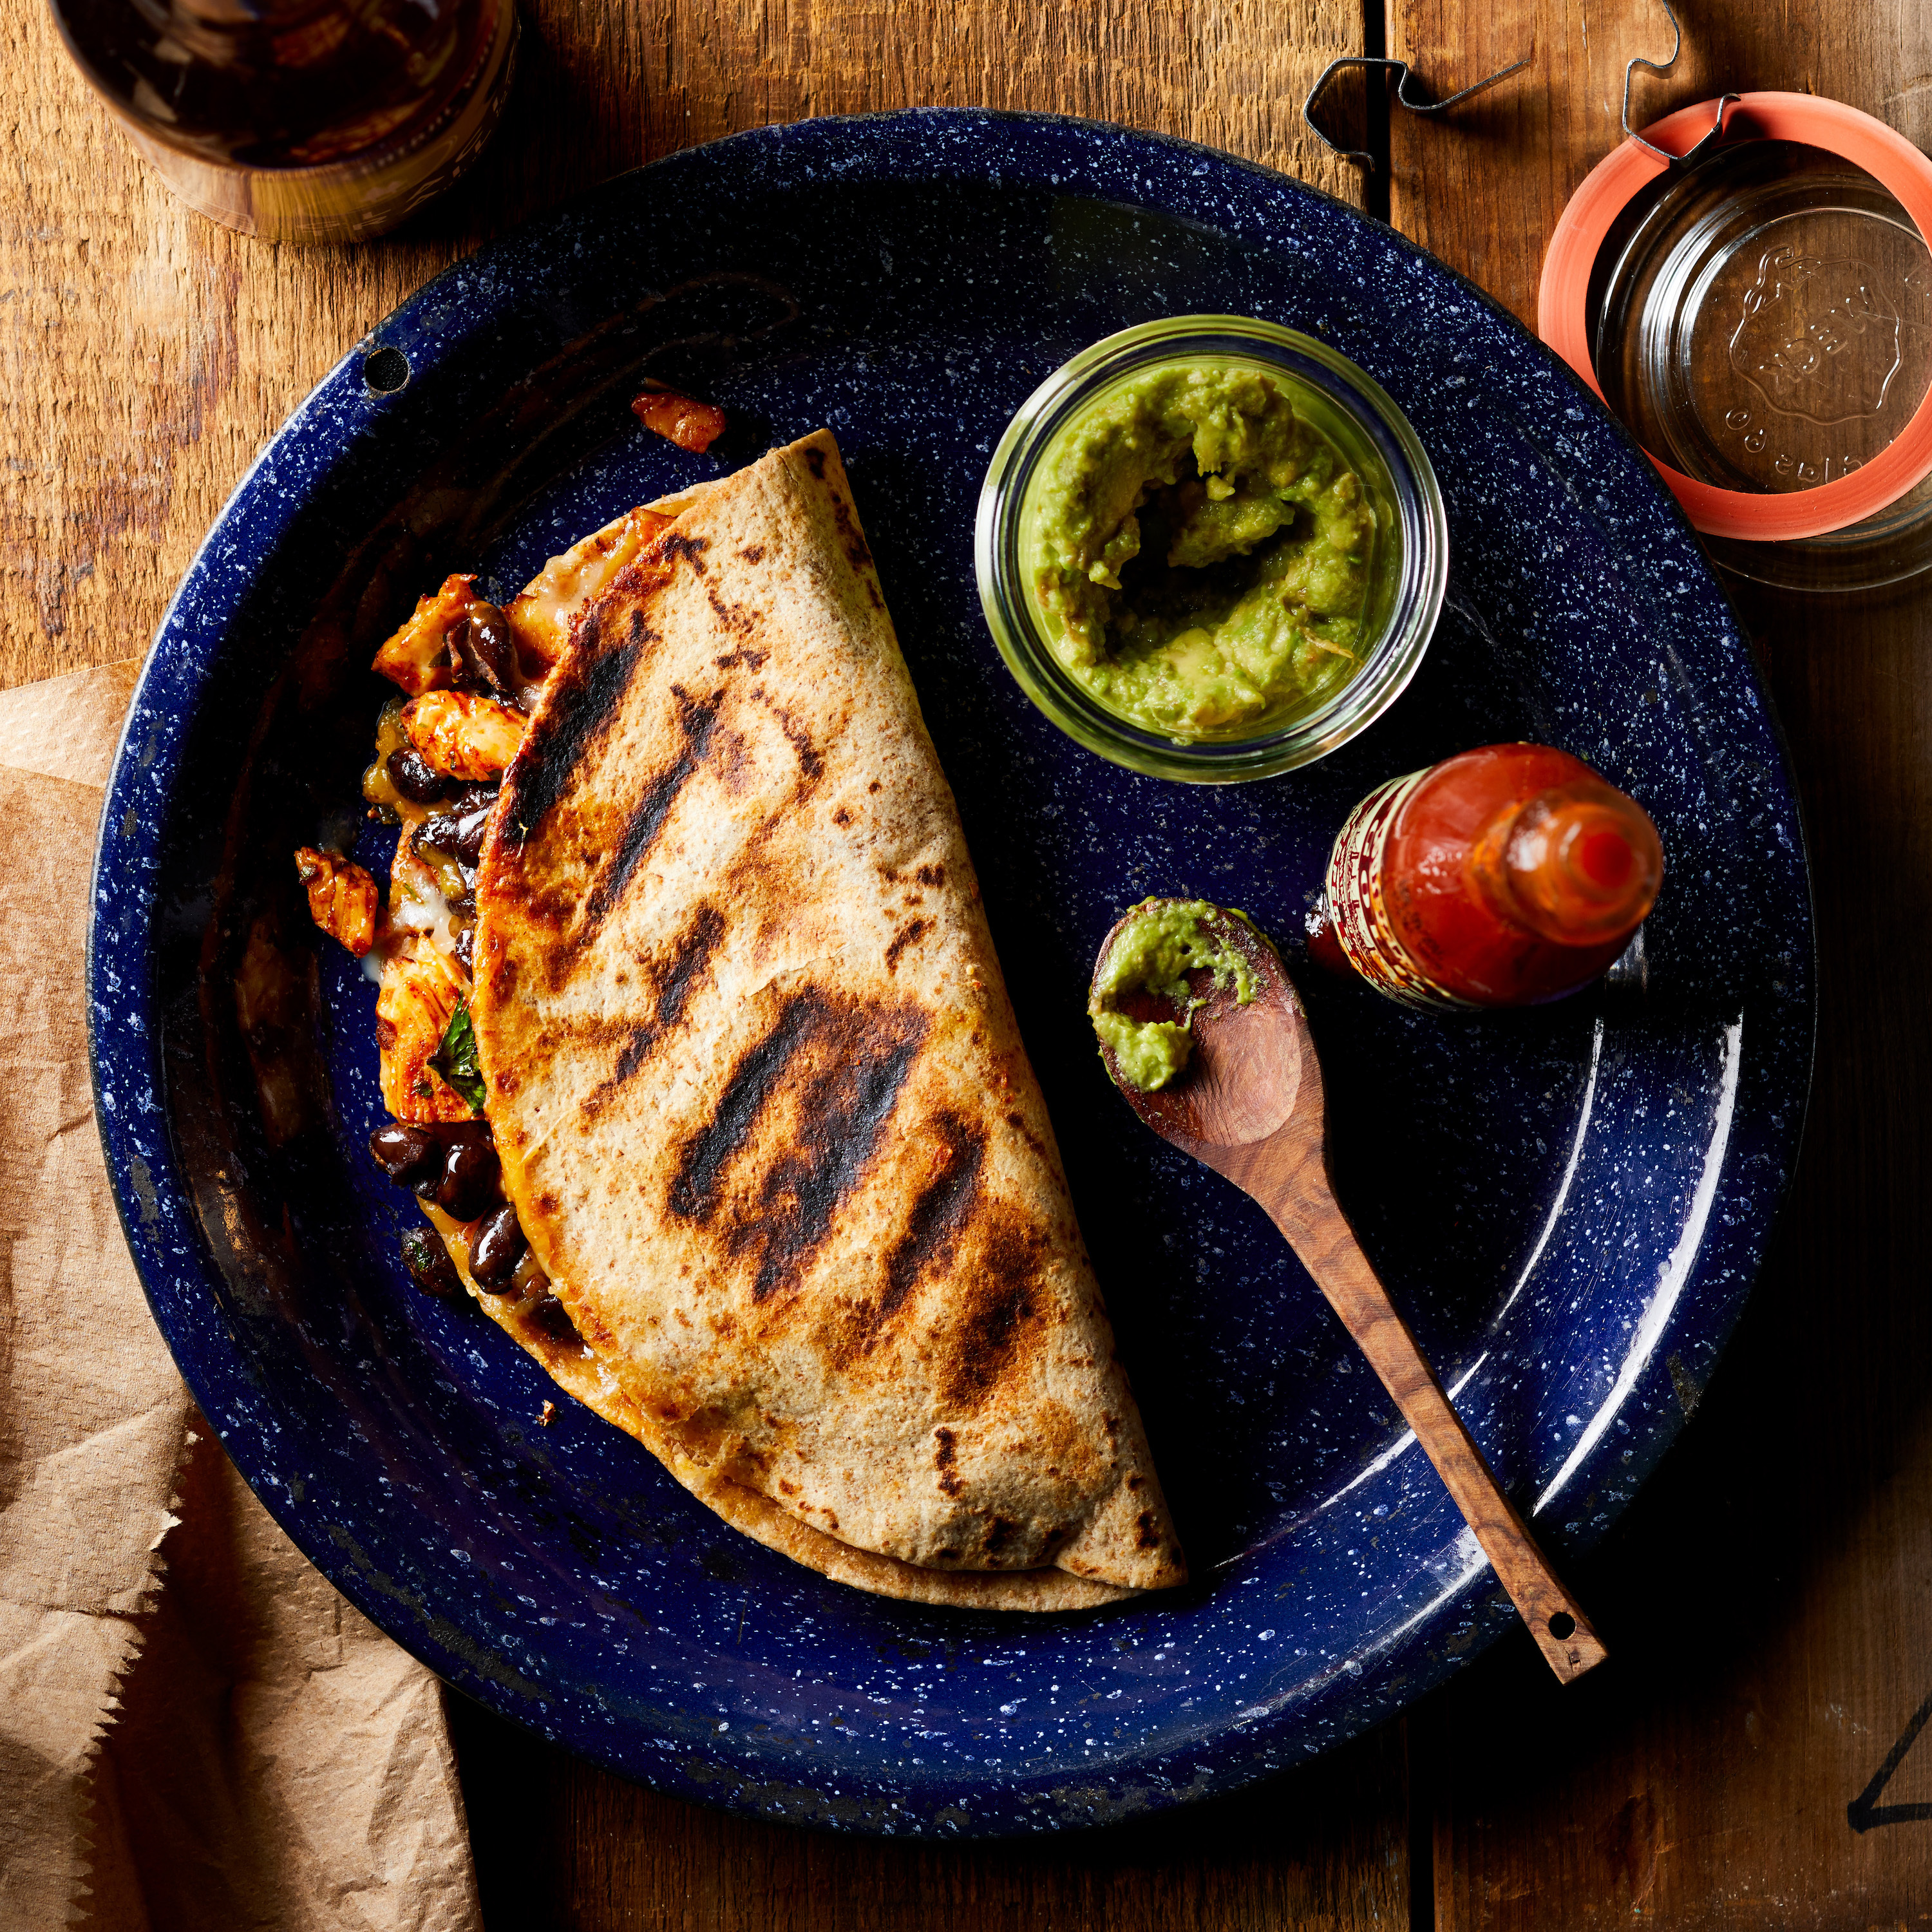 <p>These make-ahead quesadillas are a genius campfire dinner solution. Assemble and wrap in foil at home, then once you get to camp, just throw over hot coals for a quick campsite meal.</p>
                          